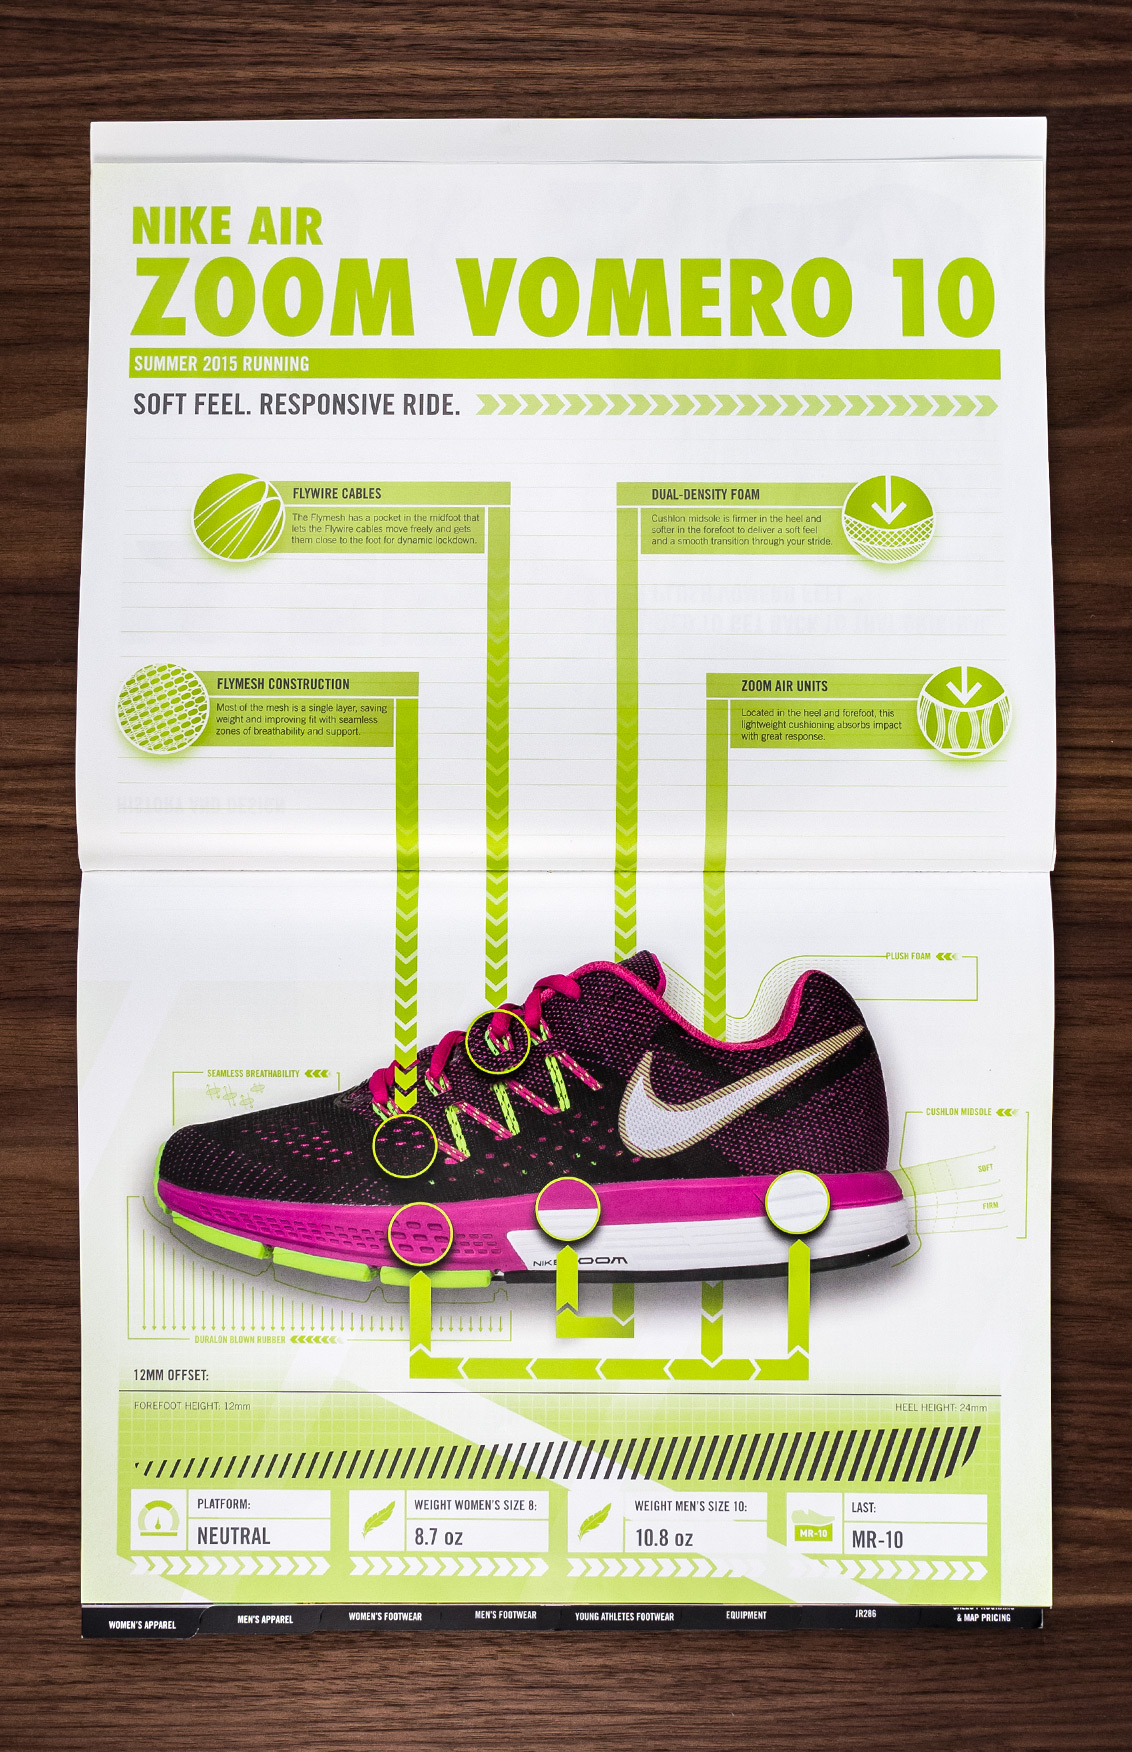 Nike Running Specialty Product Catalog design spread